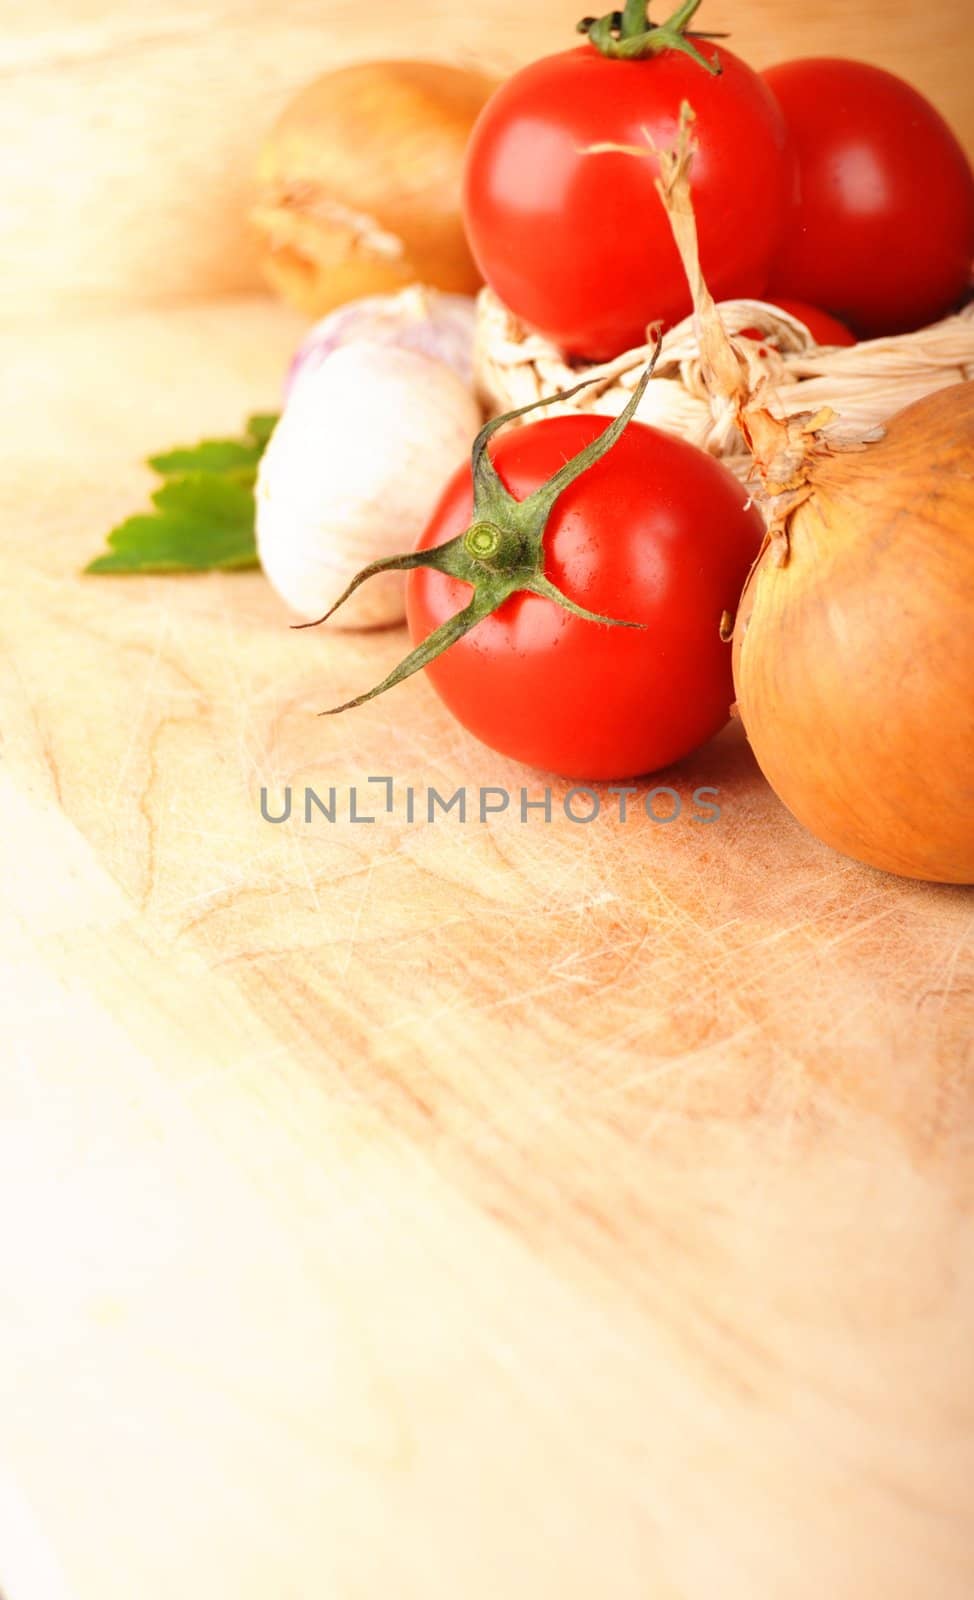 tomatoes garlic and other vegetables in kitchen showing healthy food concept